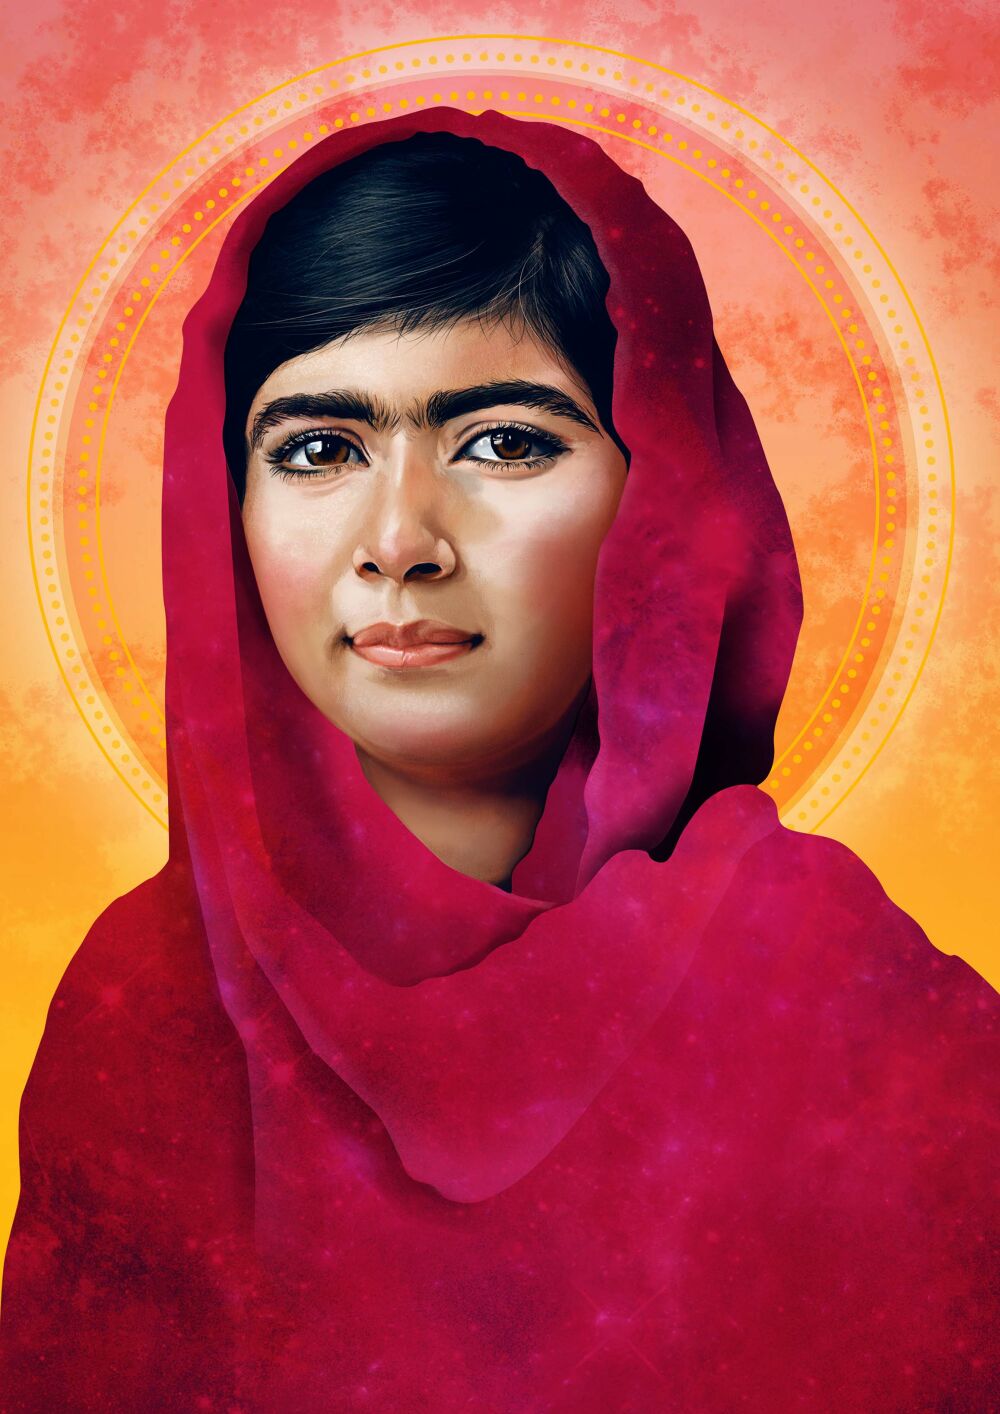 Illustrated portrait of Malala by Eplet